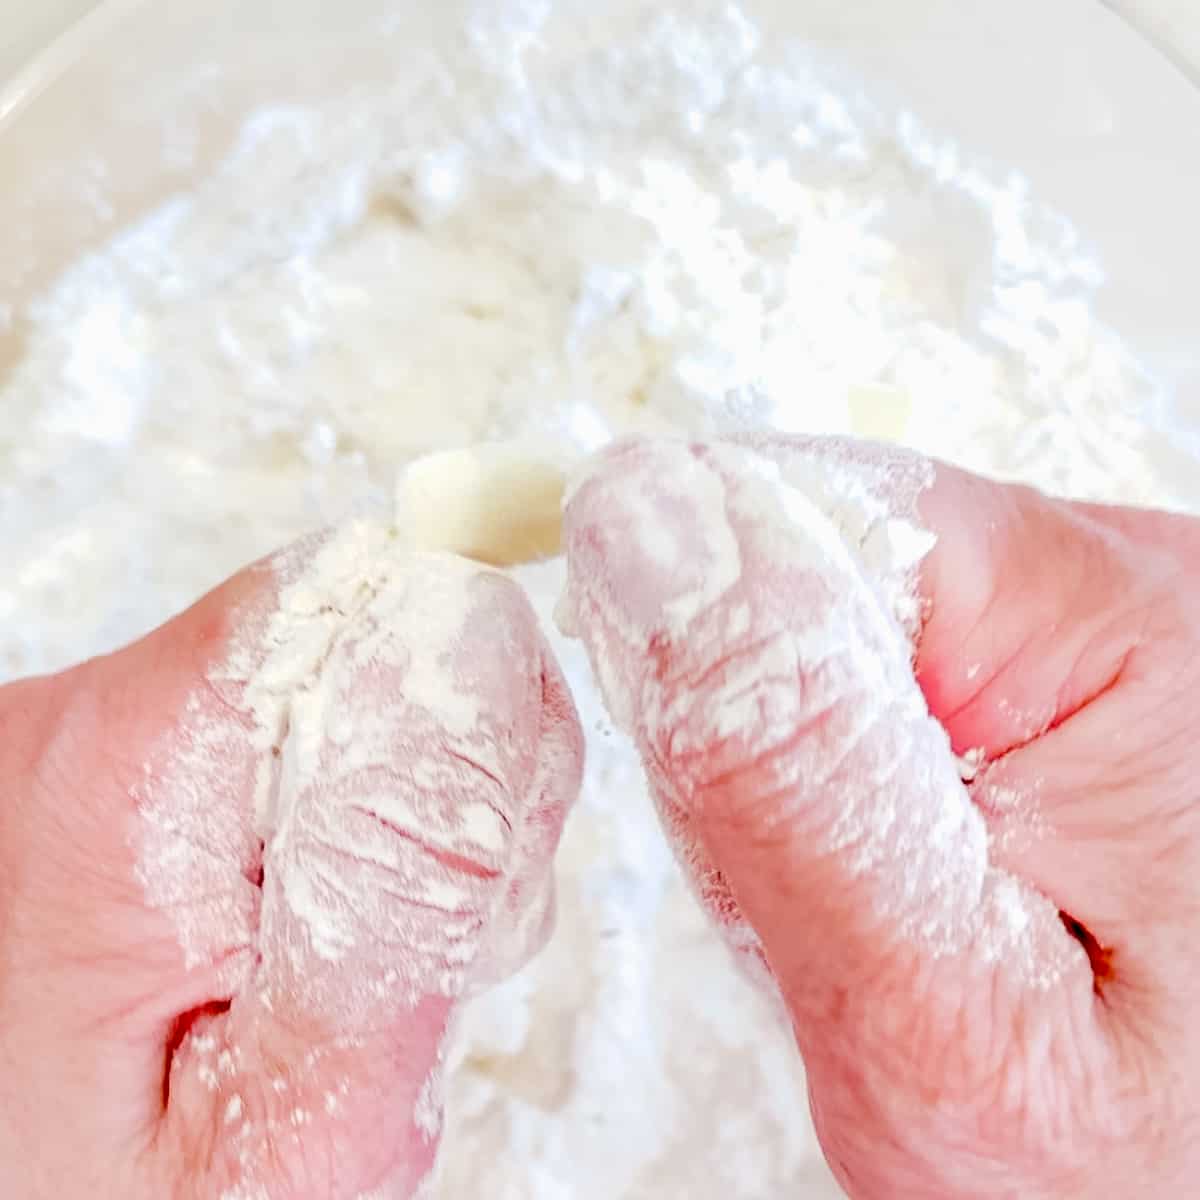 Mashing butter into flour for making biscuits.